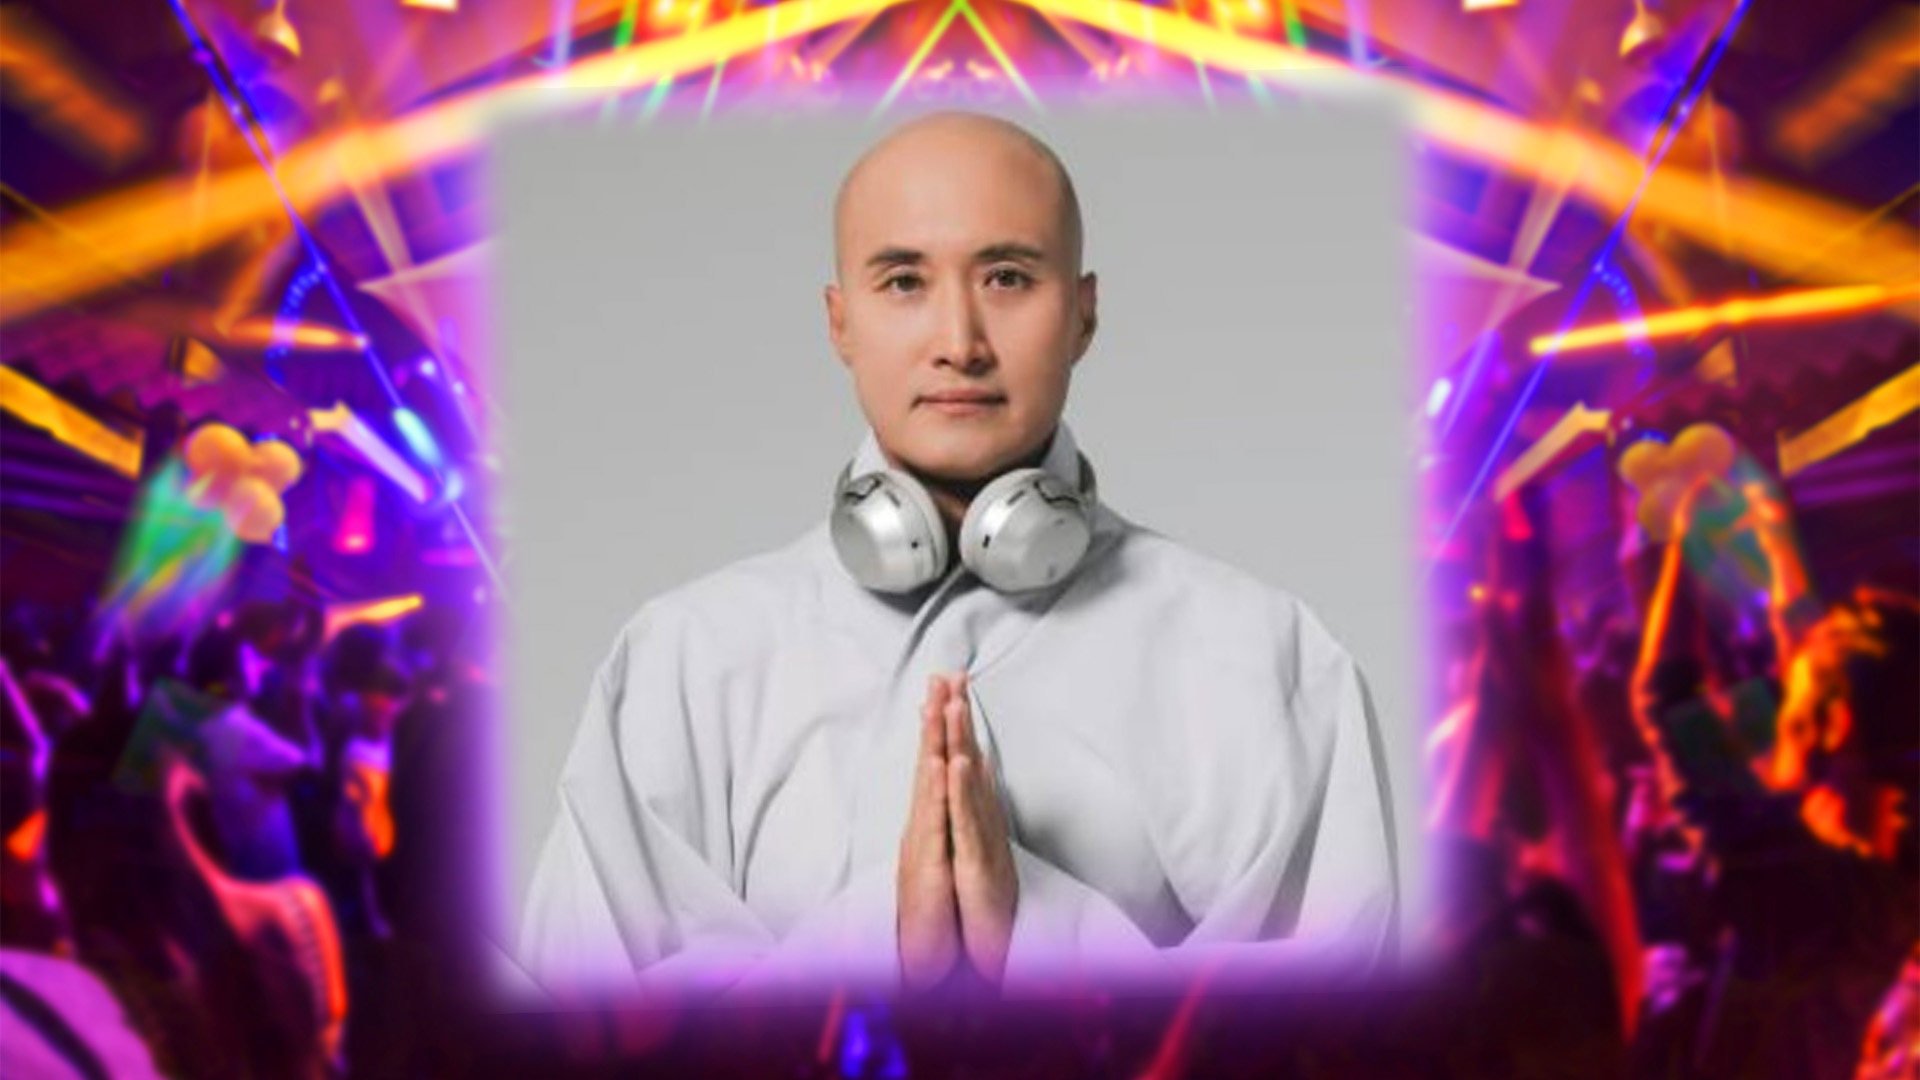 A self-proclaimed Monk DJ from South Korea has sparked outrage within the Malaysian Buddhist community by guiding club-goers in a dance inspired by Buddha. Photo: SCMP composite/Shutterstock/Instagram